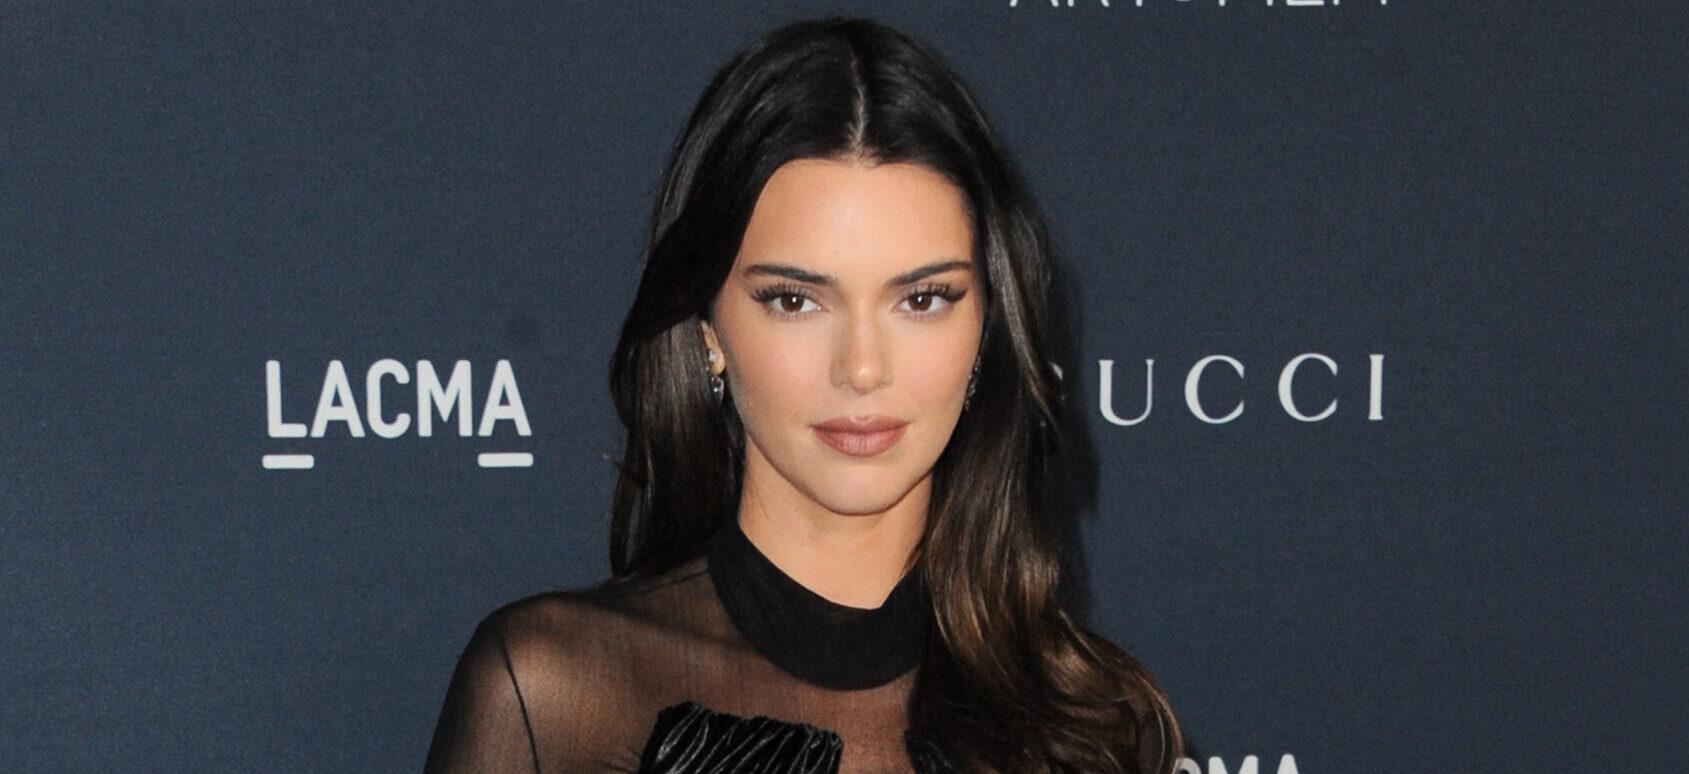 Kendall Jenner Stuns In Tiny Bikini That Goes ‘Against IG Guidelines’